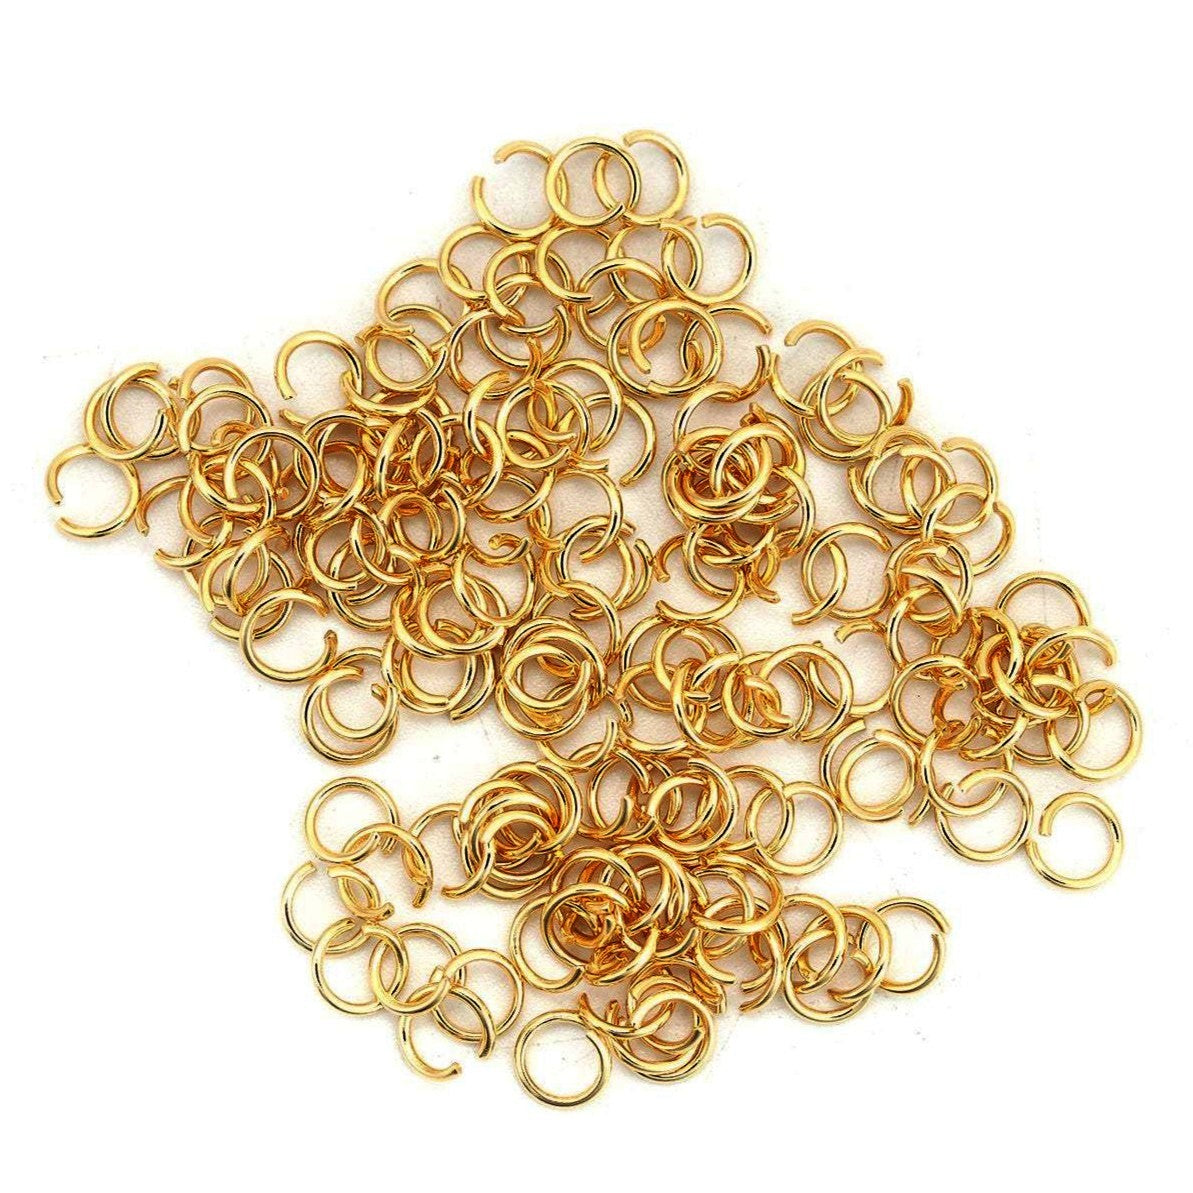 Gold stainless steel open jump rings 3, 4, 5 or 6mm - Hypoallergenic